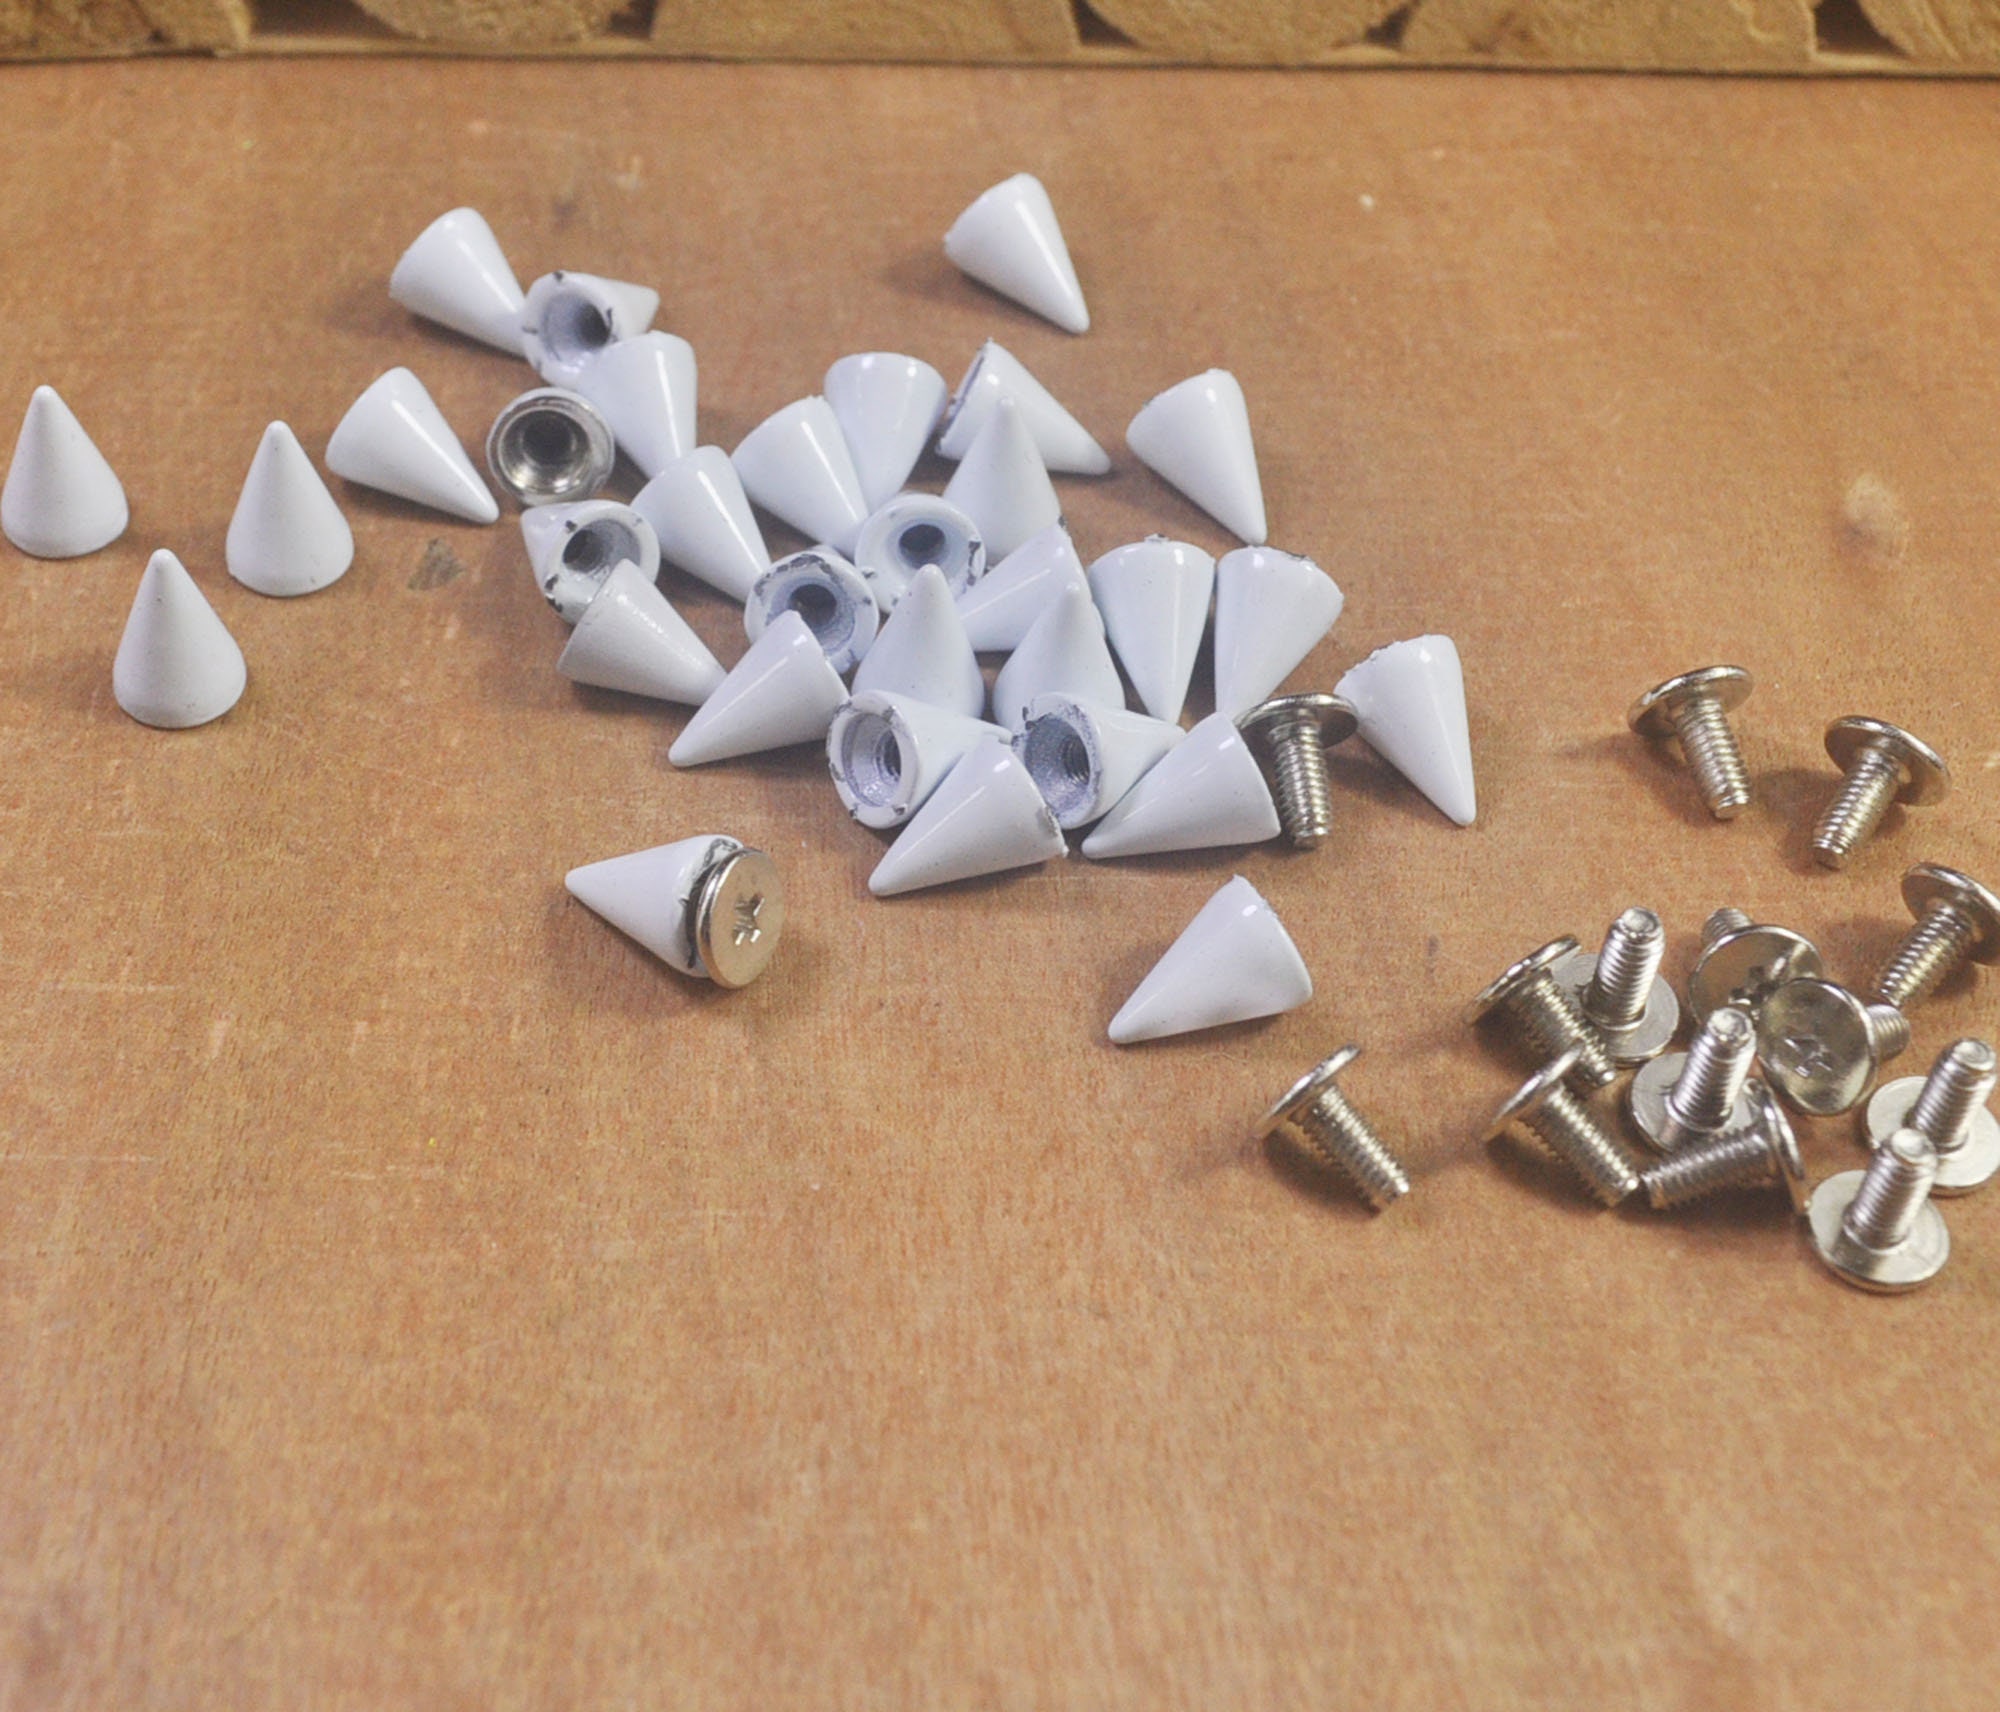 50pcs White Cone Spike Studs With Screwback Bullet Rivets Buttons Custom  Punk Shoes Bags Leather Crafts Accessories DIY 